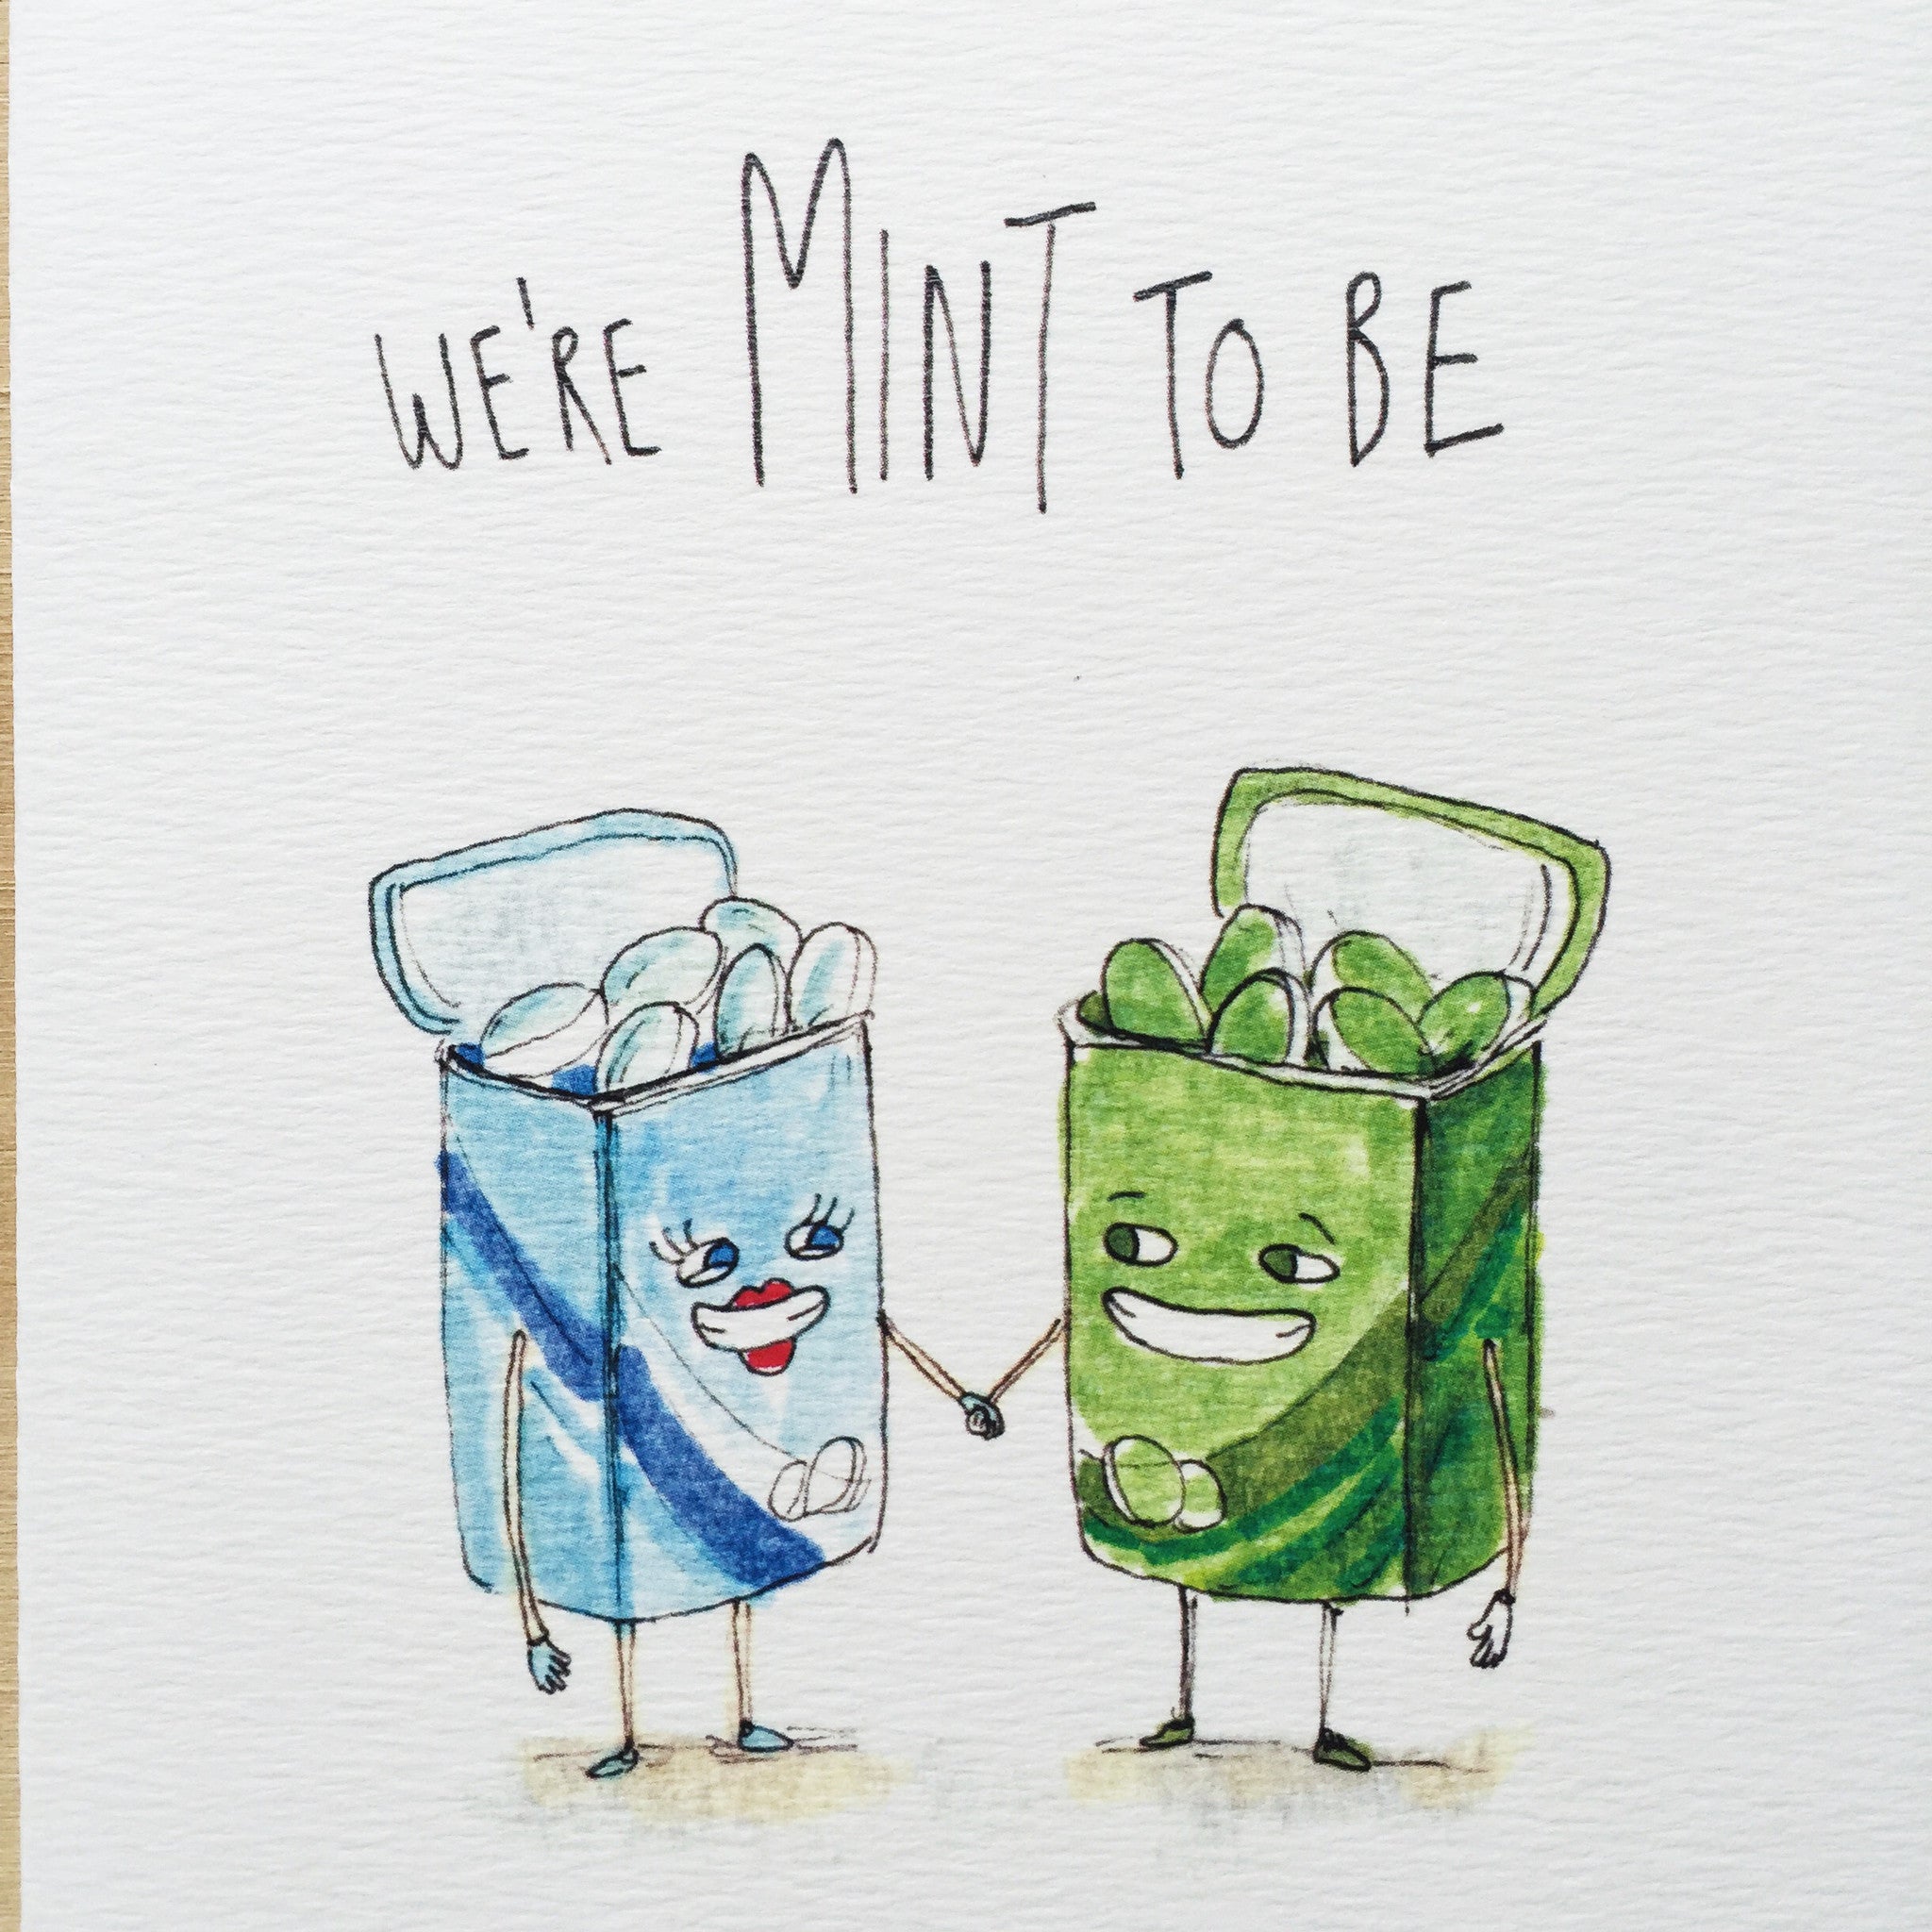 We're Mint To Be - Well Drawn